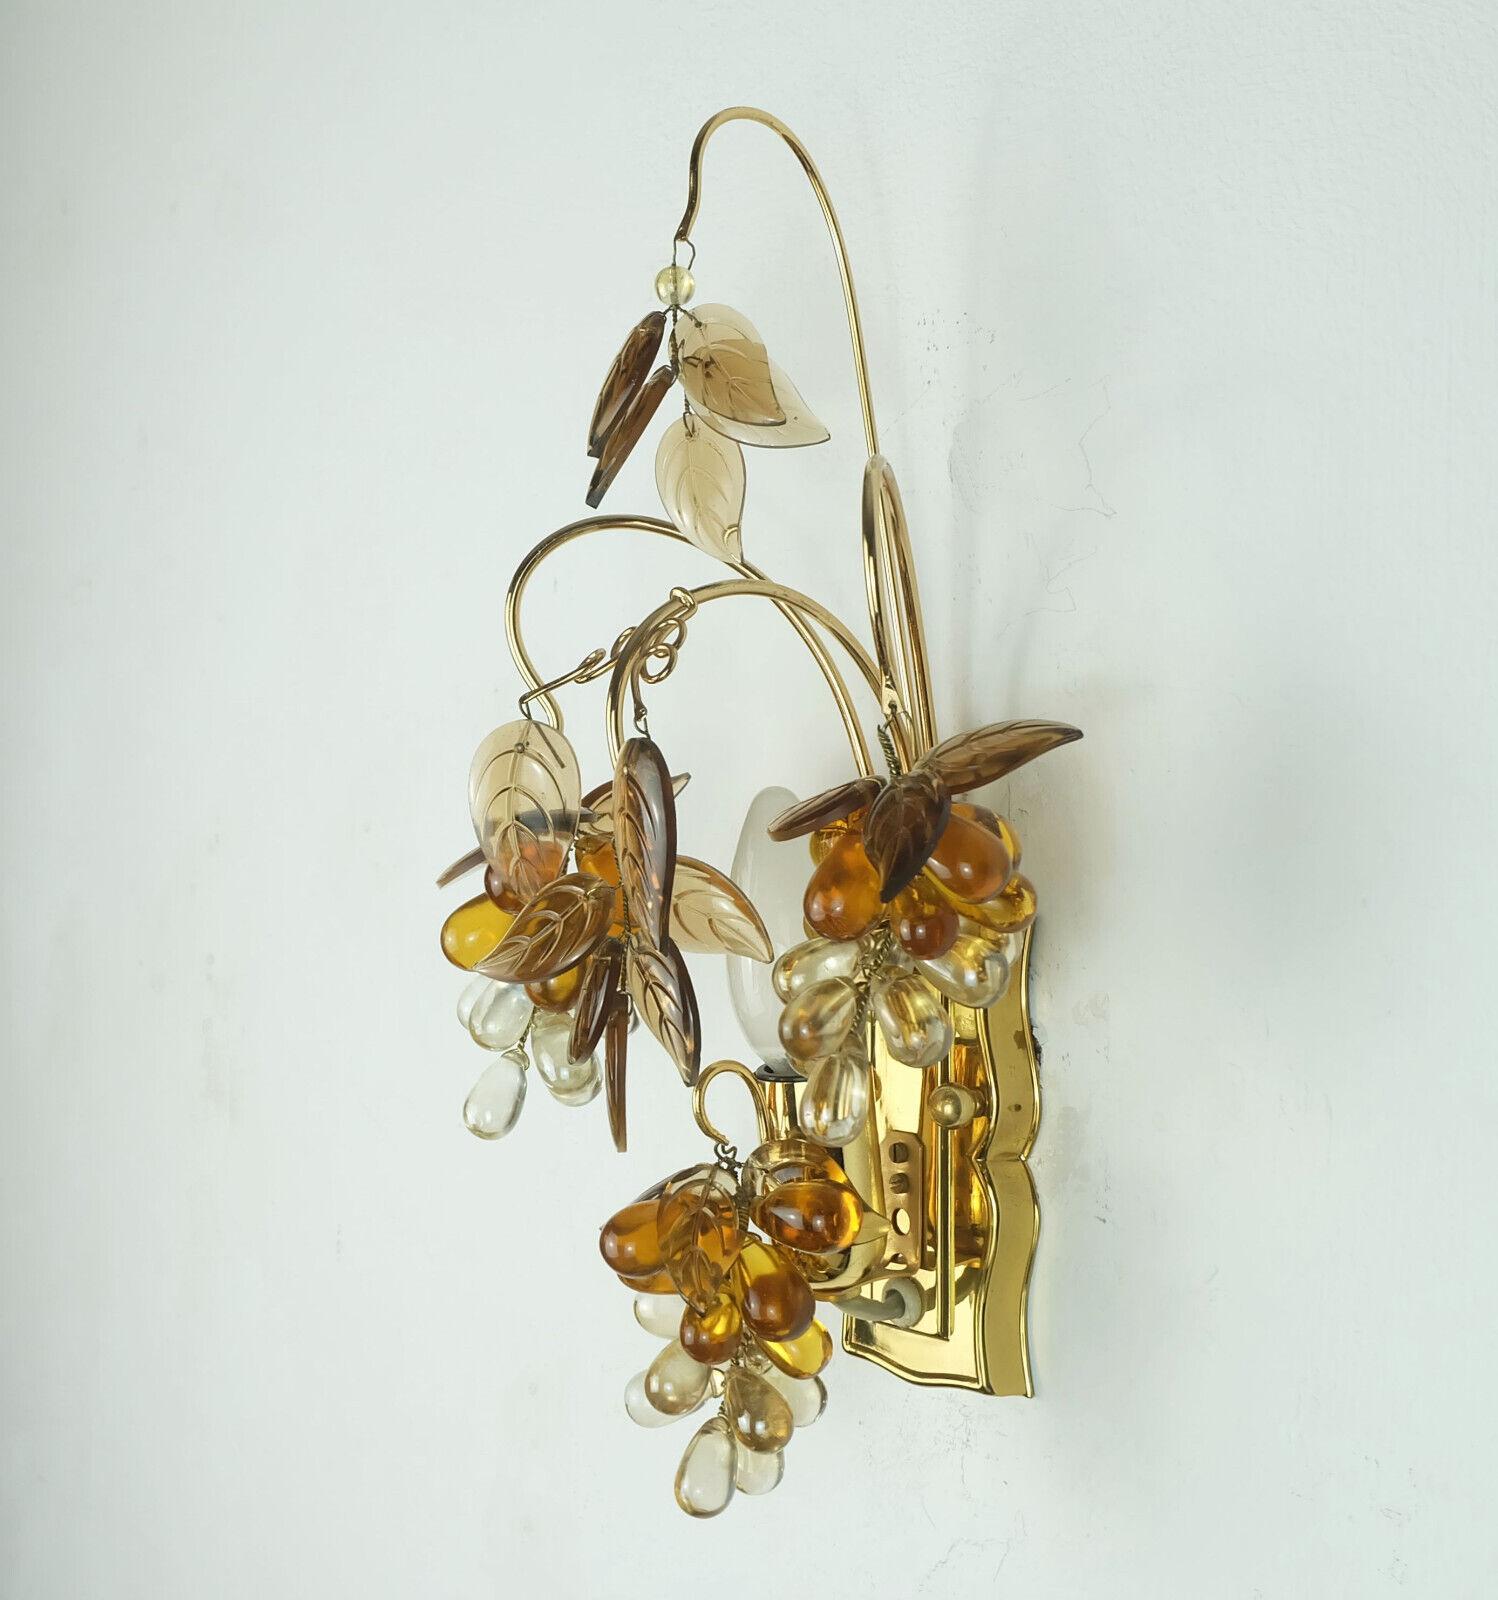 Very beautiful mid century sconce manufactured by Palwa (Palme & Walter) in the 1970s. Made of crystal glass formed of grapes and leaves, frame made of gilt brass. Holds 1 E14 bulb. 

Dimensions in cm:
Height 34 cm, width 19 cm, depth 12